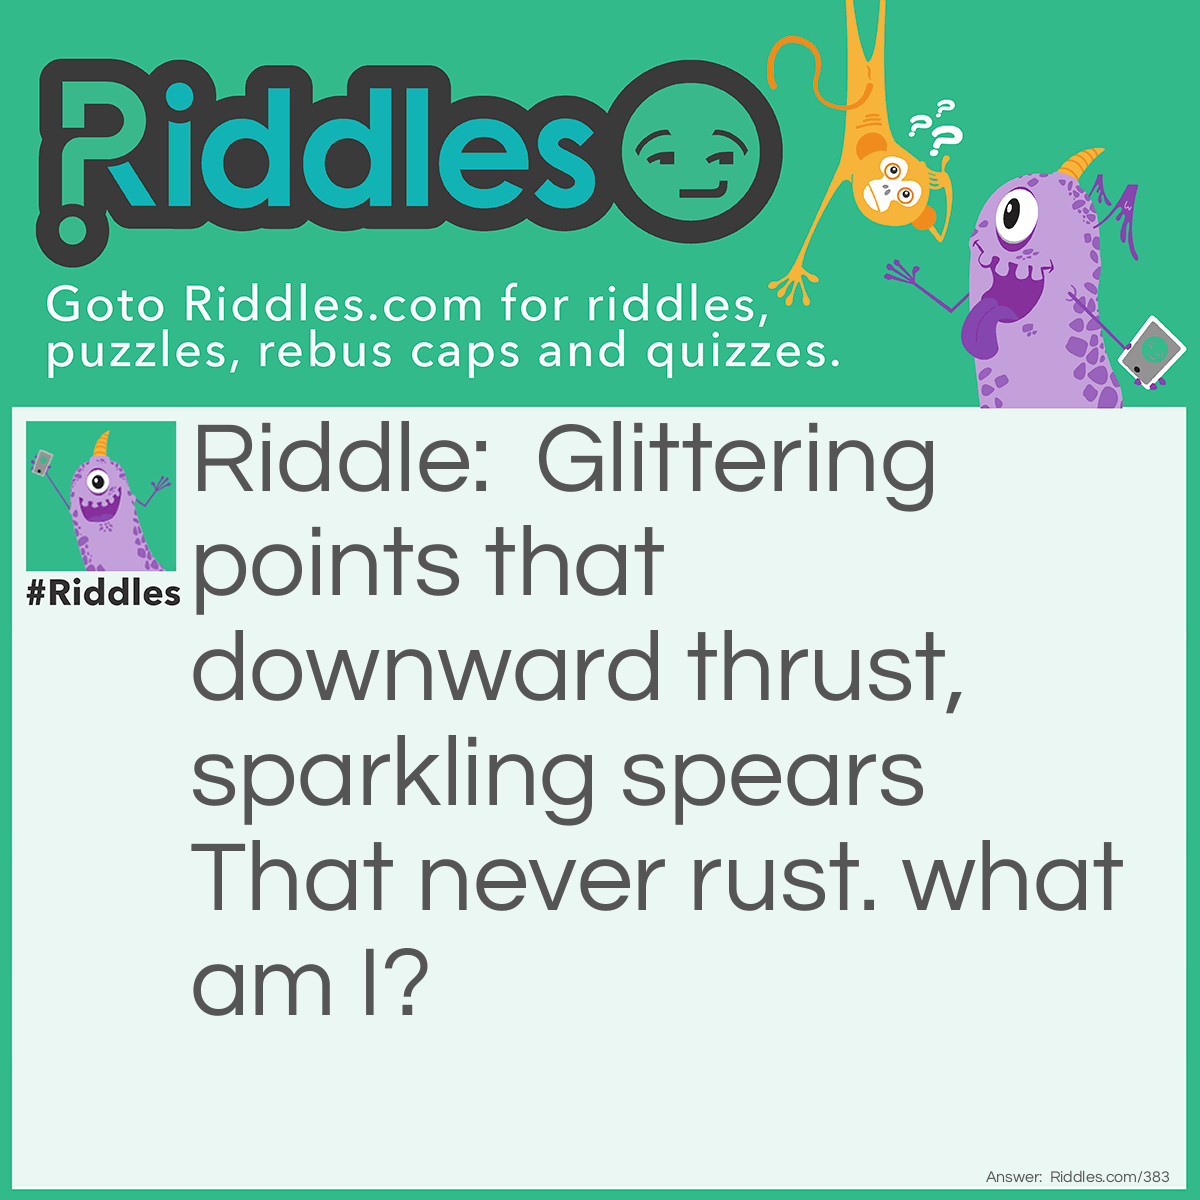 Riddle: Glittering points that downward thrust, sparkling spears That never rust. what am I? Answer: Icicles.